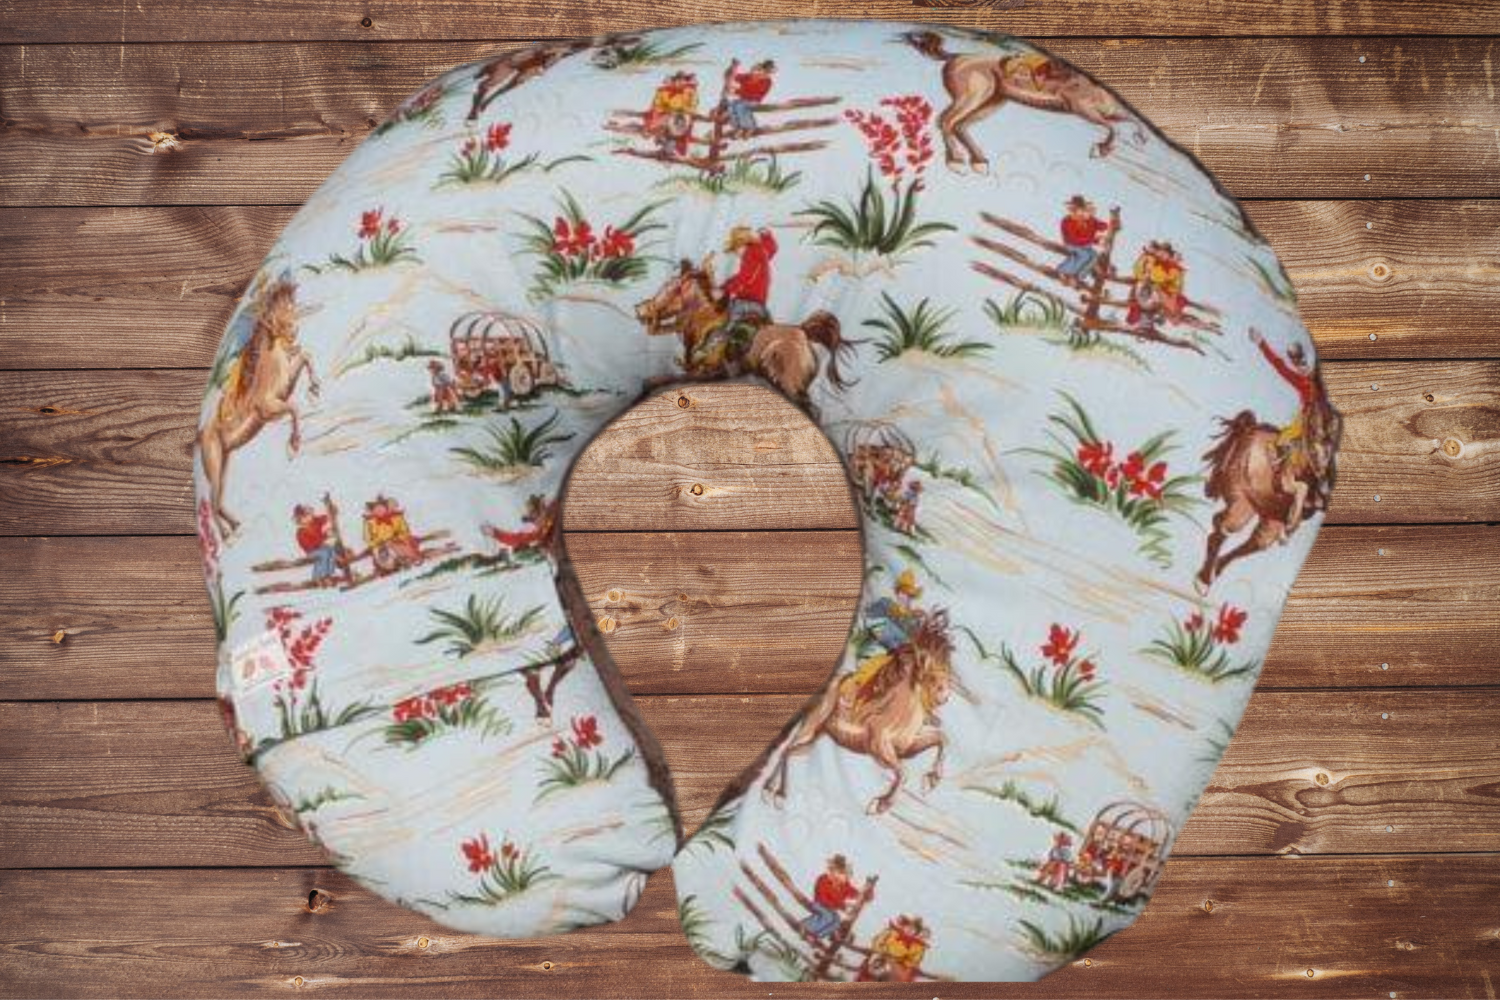 Nursing Pillow Cover - Barn Dandy Cowboy and Brown Minky Western Cover - DBC Baby Bedding Co 